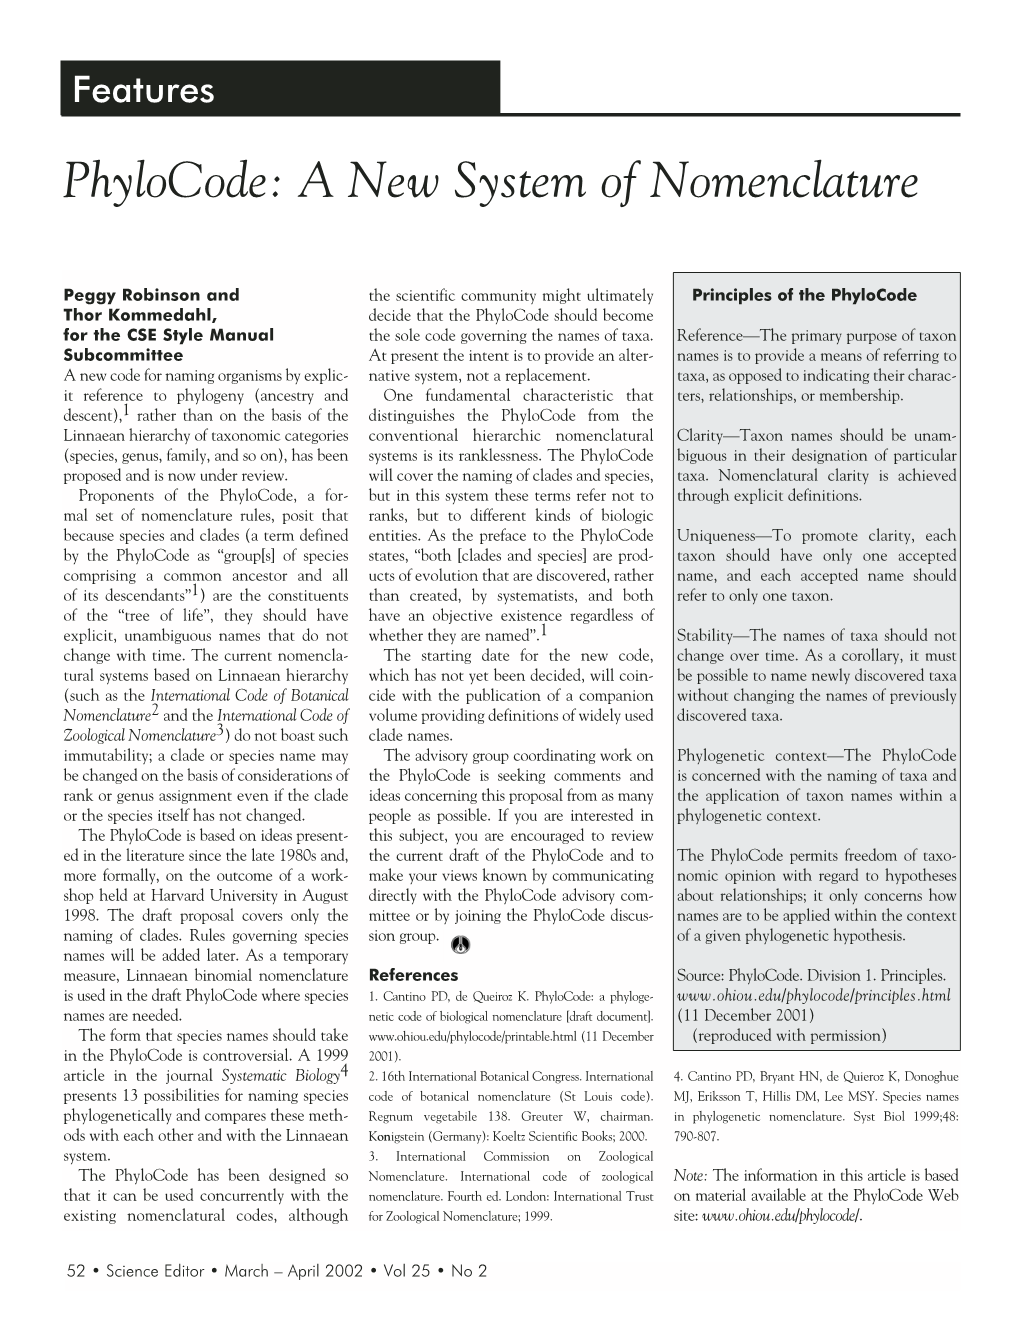 Phylocode: a New System of Nomenclature